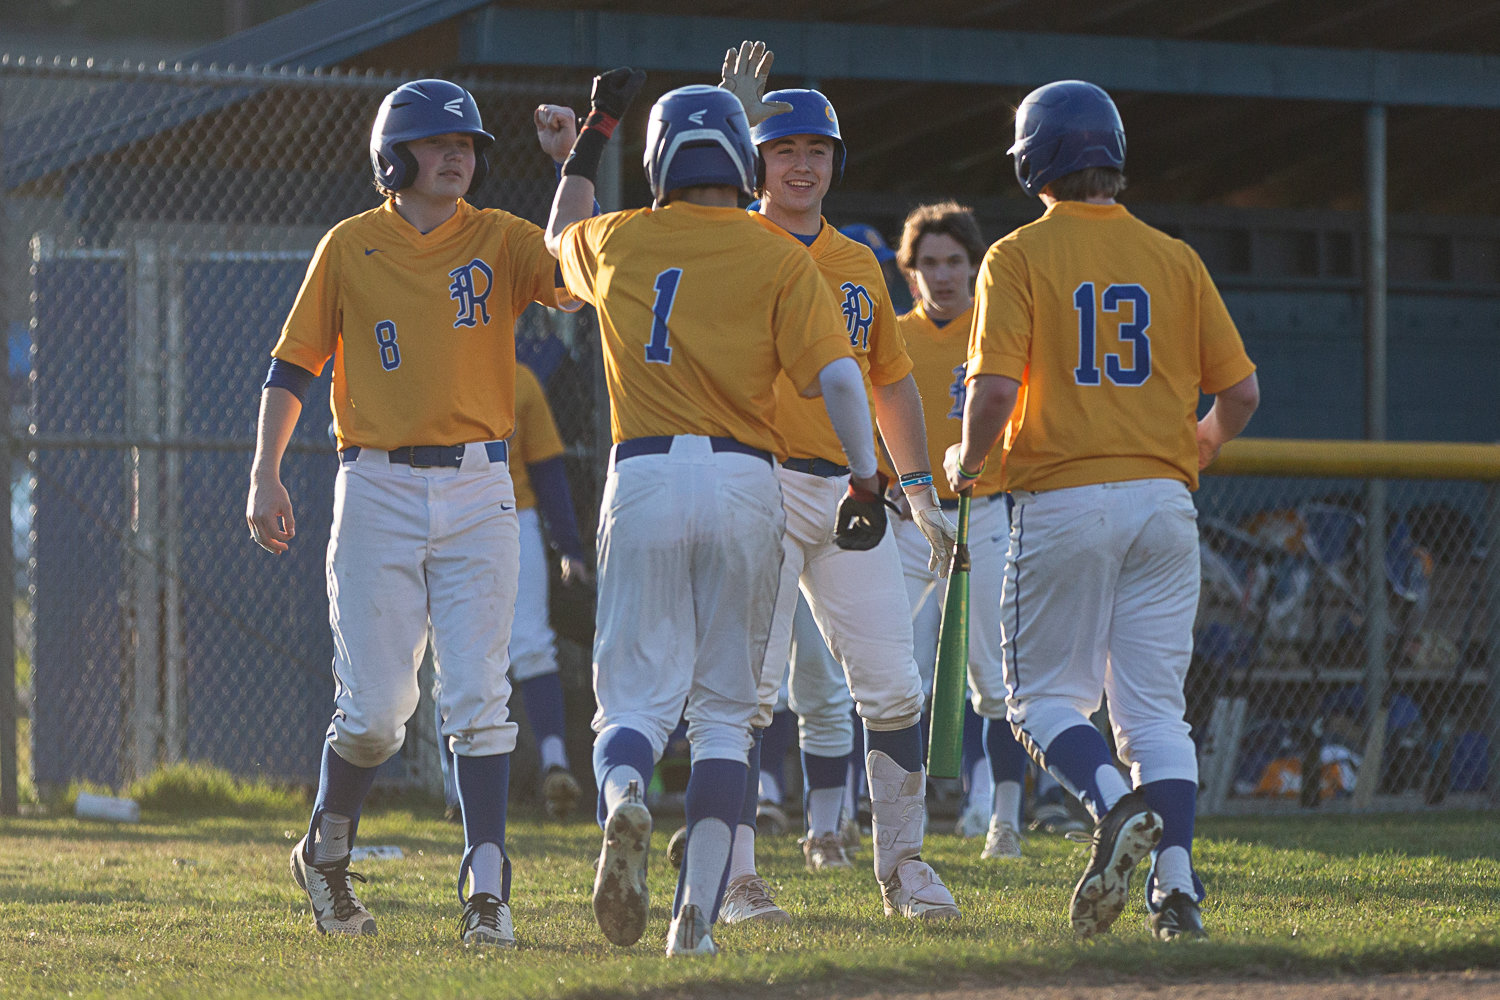 Rochester celebrates after a run against W.F. West at Heinz-Rotter Field March 21.